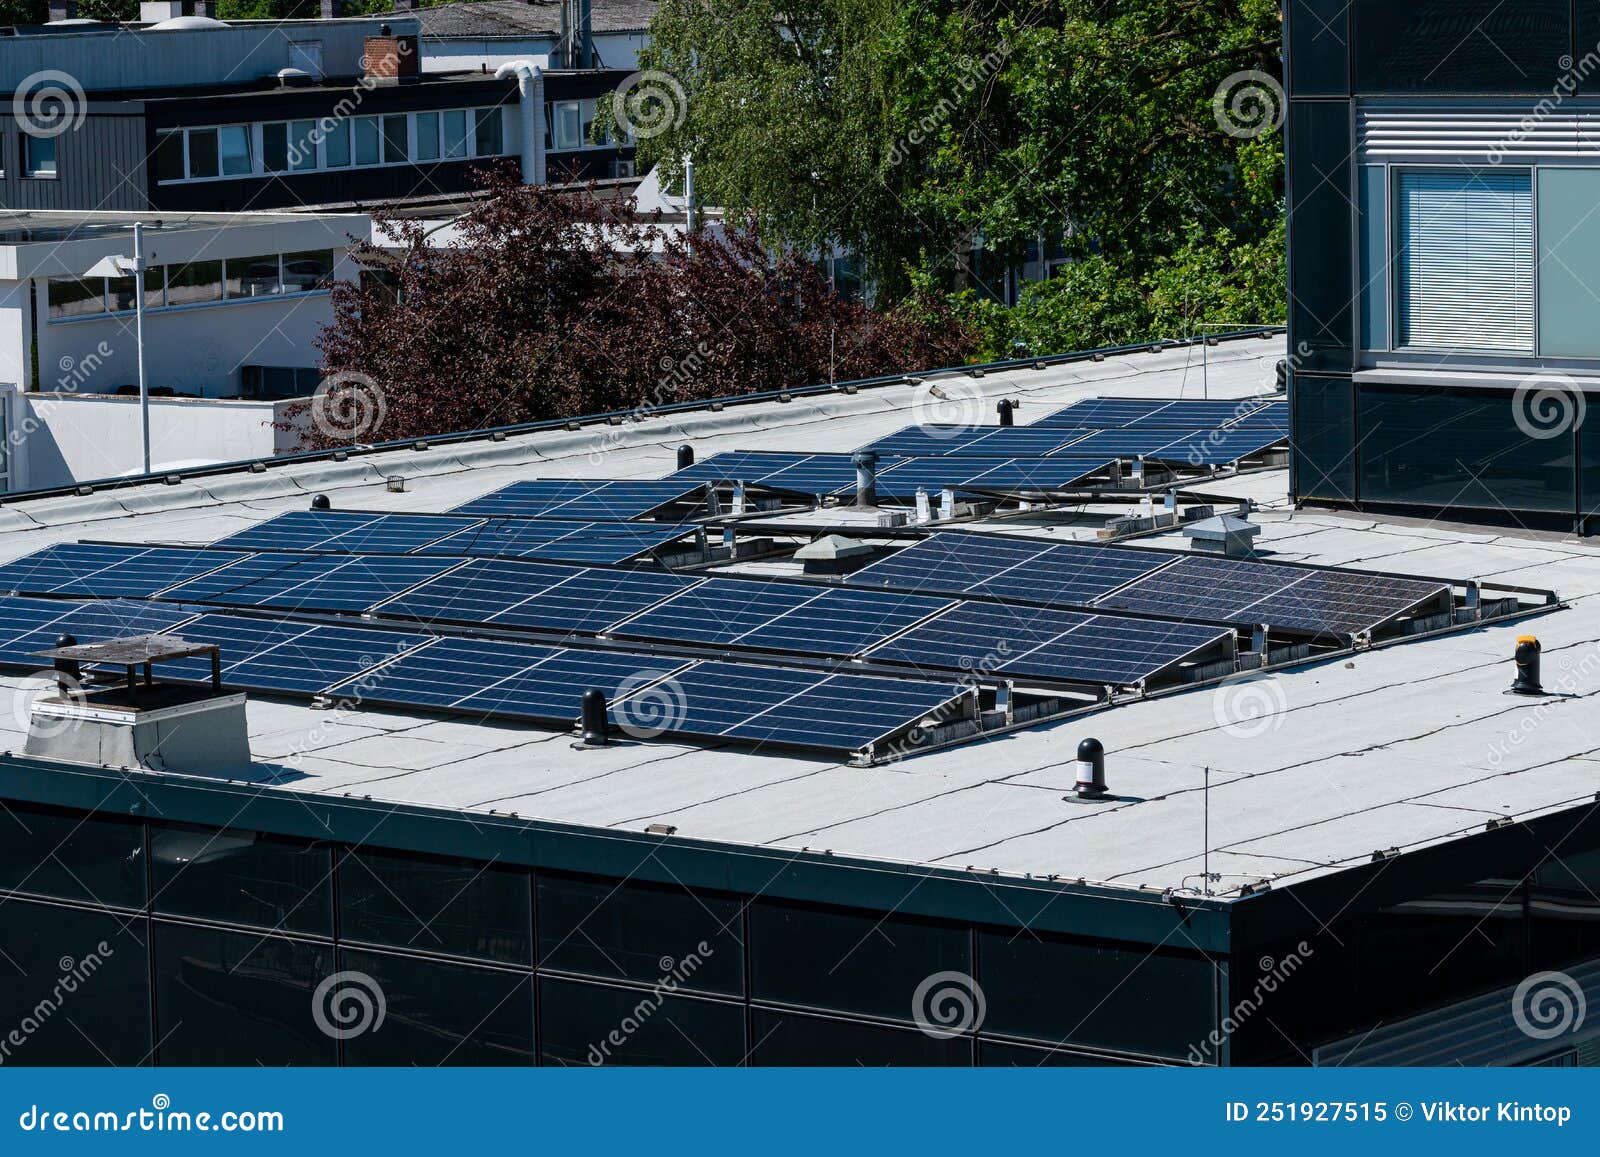 solar panels on the roof of an administrative building